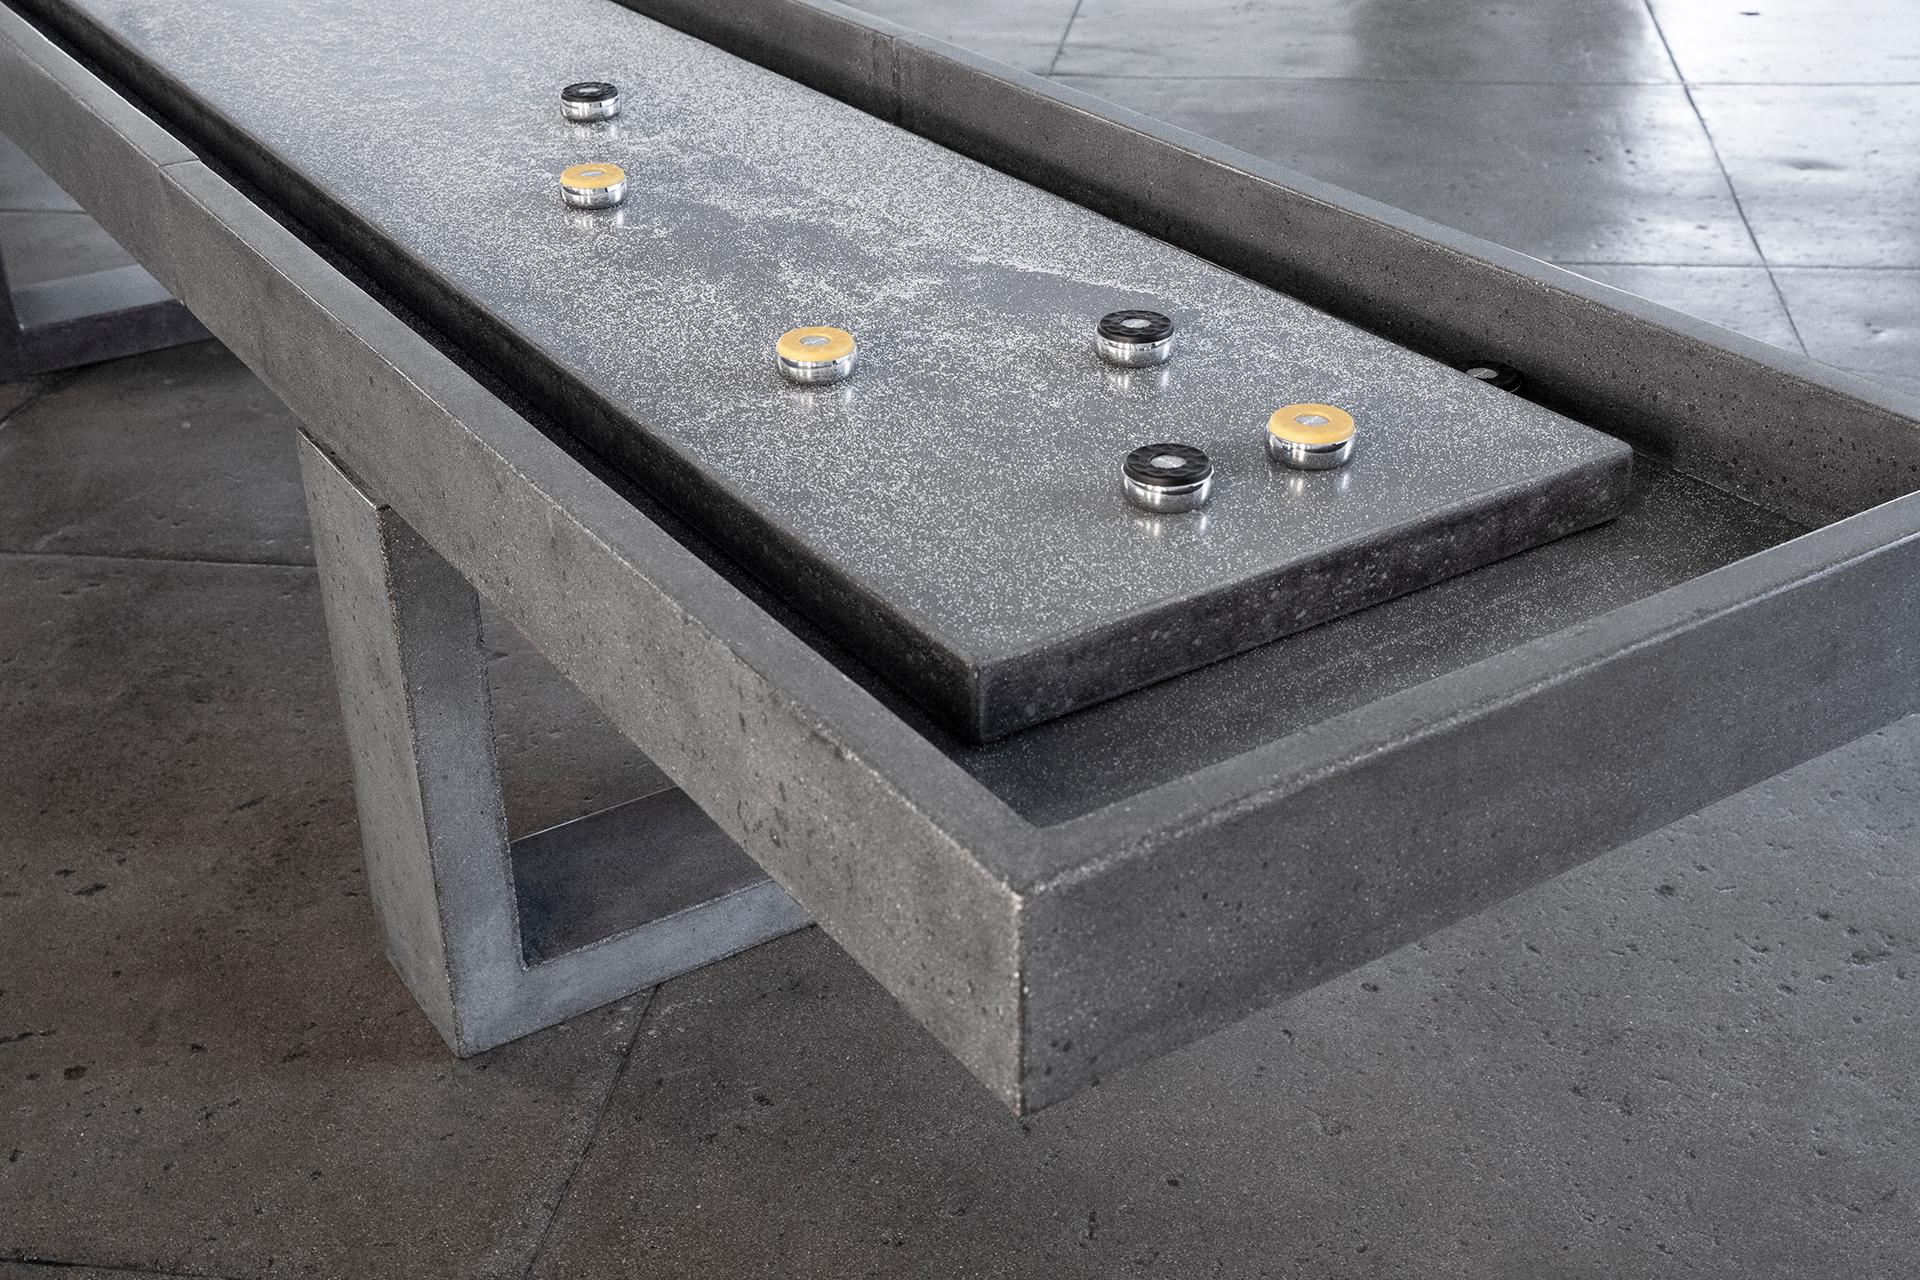 The James de Wulf Shuffleboard table is a lively addition to any game room. The 9' table is constructed of concrete reinforced with carbon fiber. The smooth glide of the pucks across the finished concrete, paired with the table's brutal design,